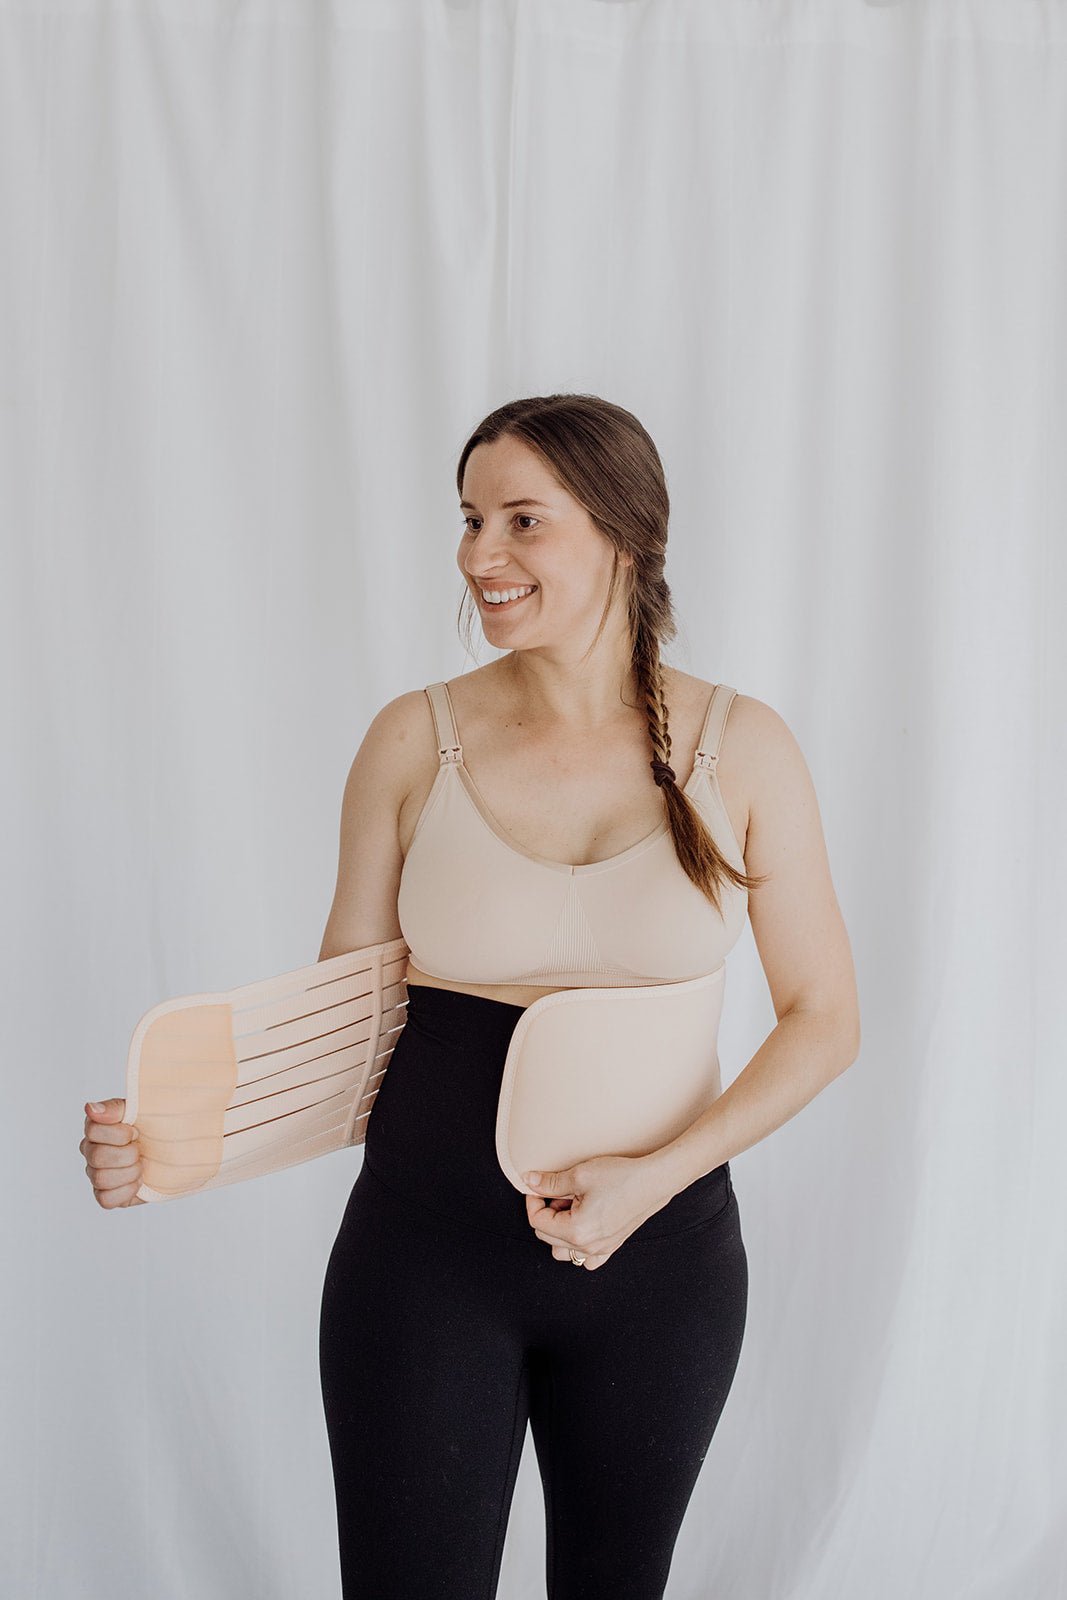 3 in 1 Postpartum Belly Band